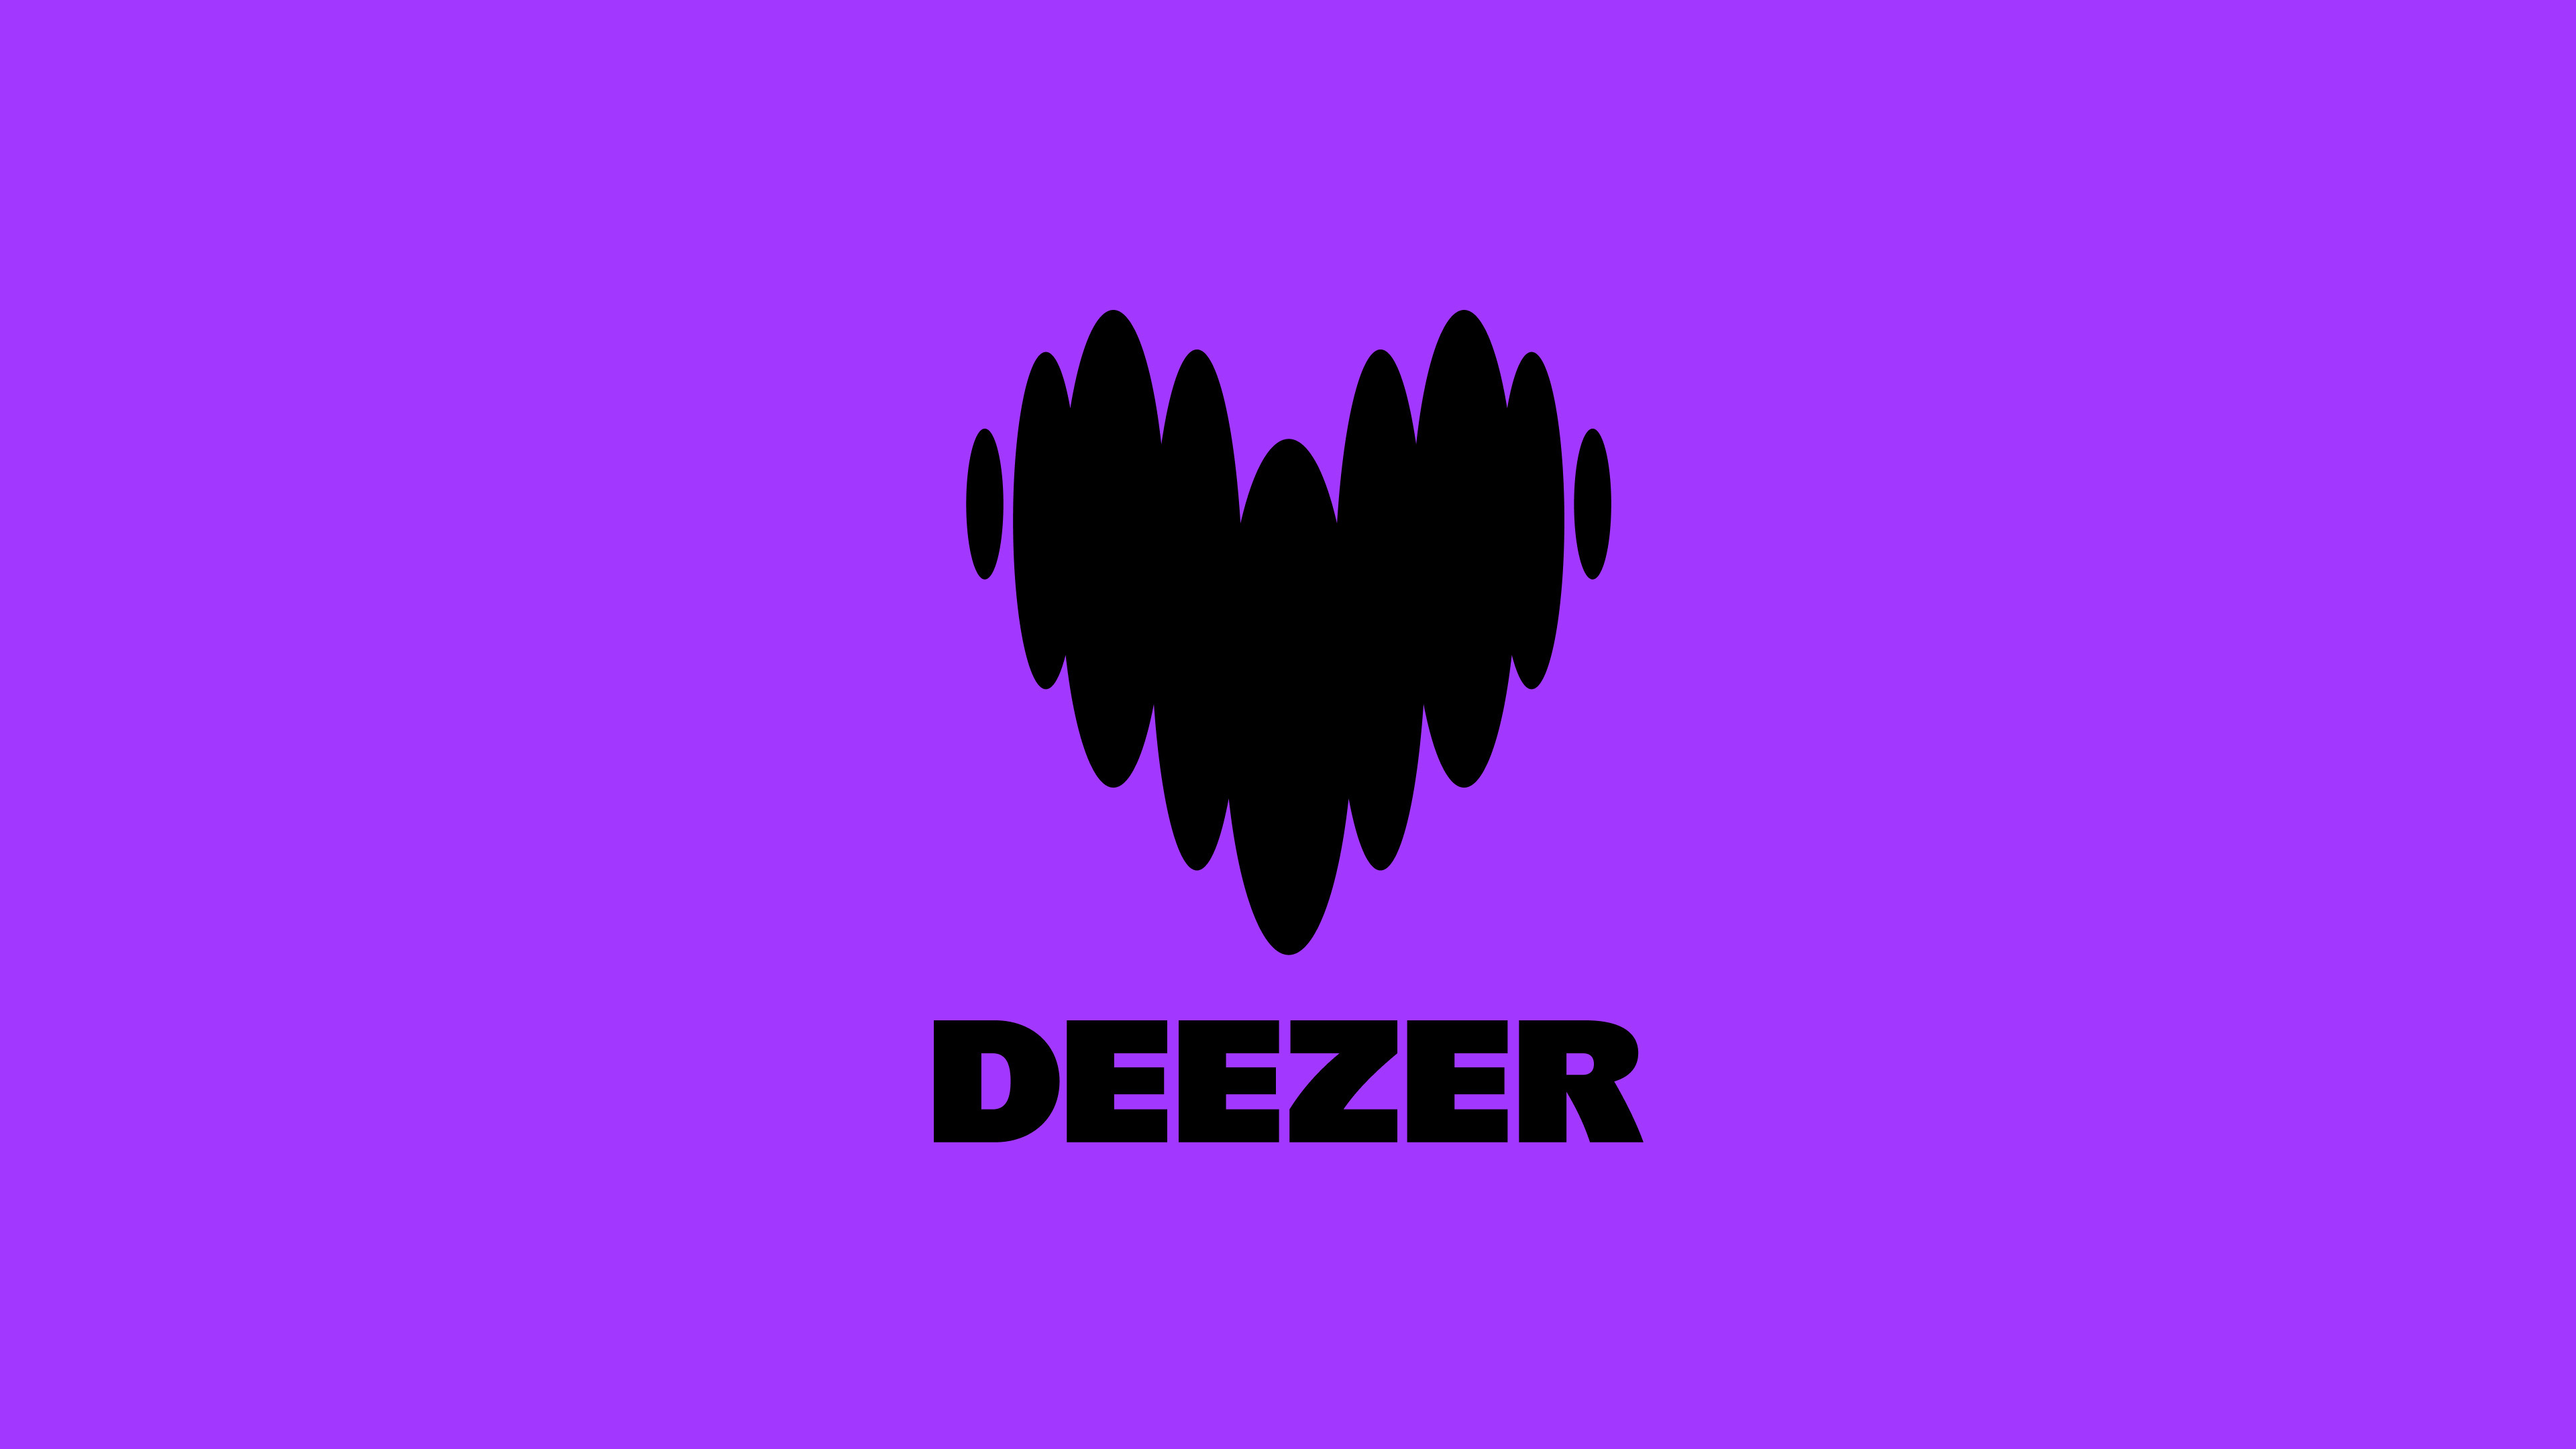 Deezer's new rebrand is a striking and colourful delight | Creative Bloq